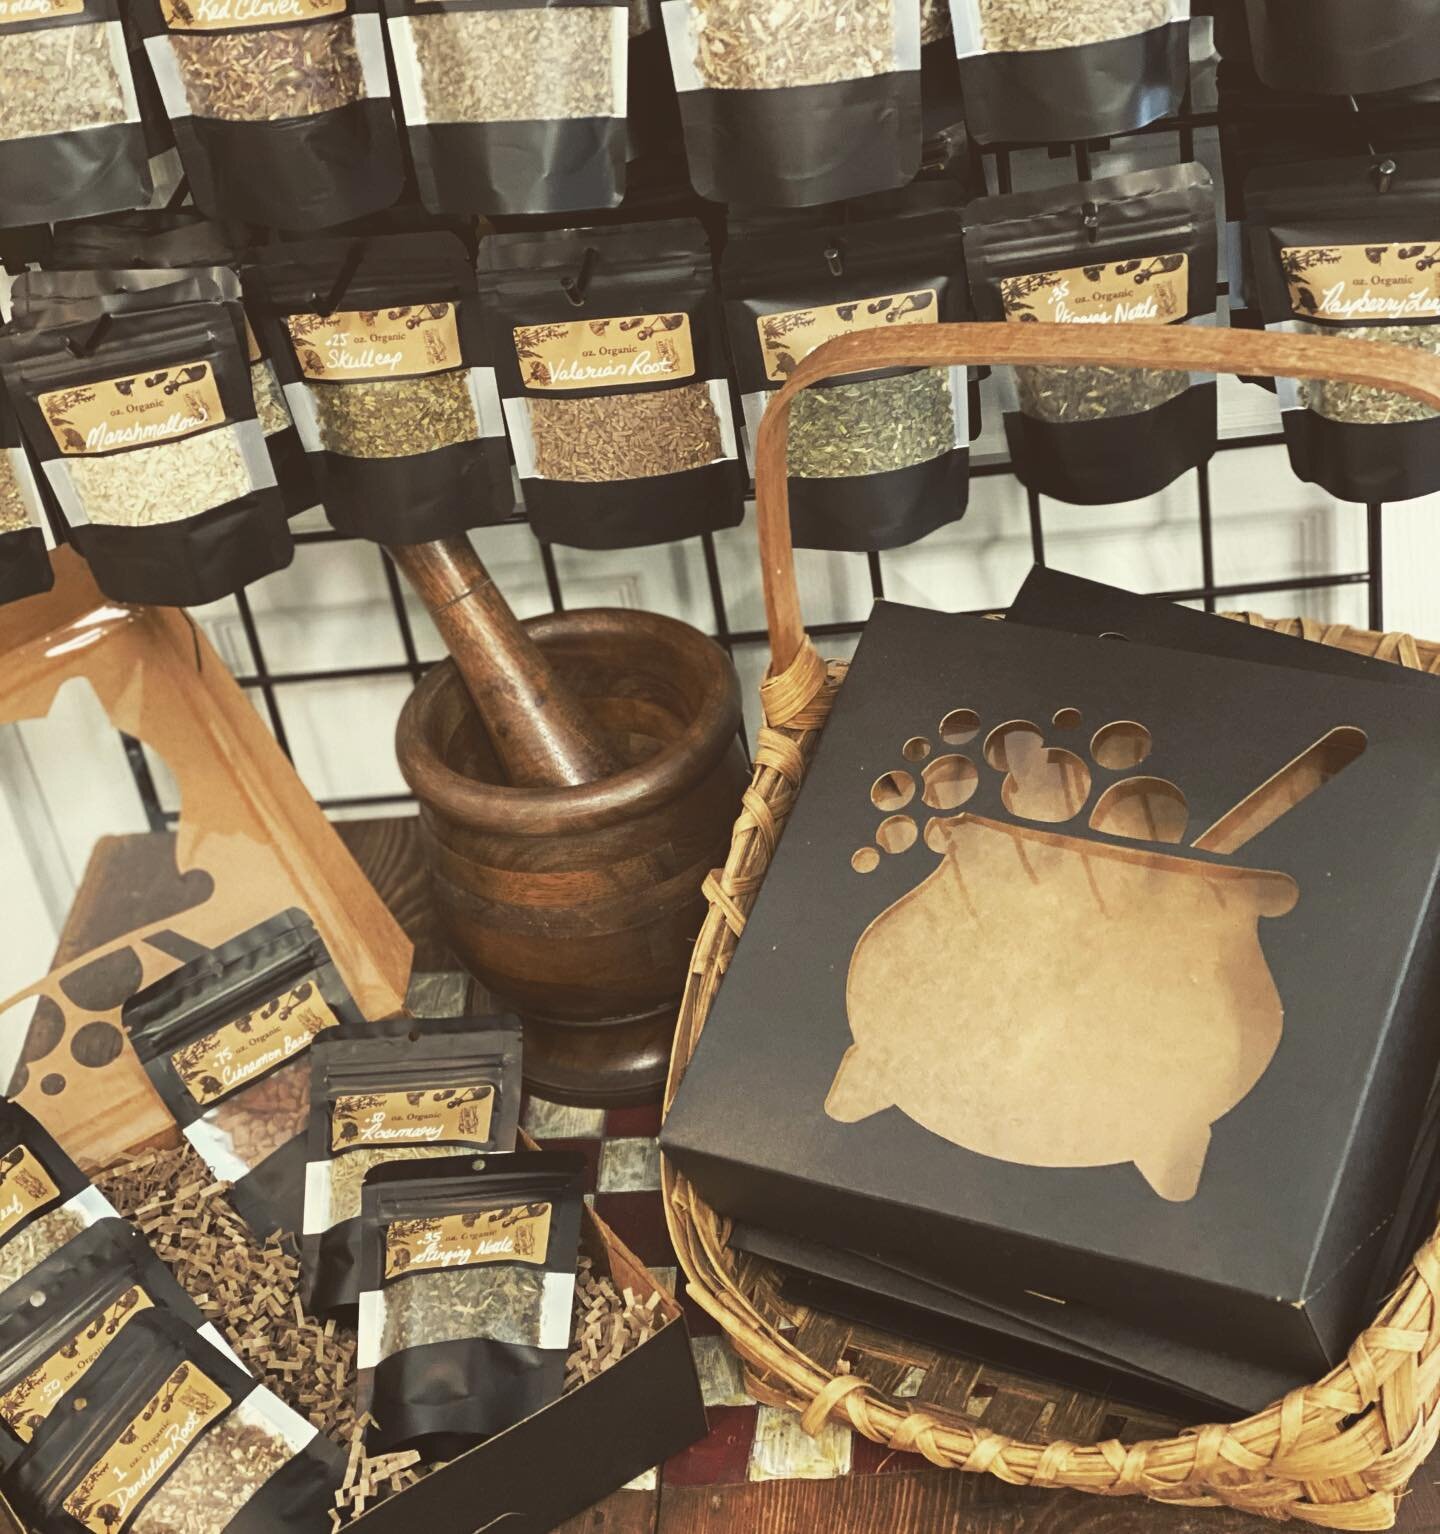 Create your own apothecary gift box in one of these adorable cauldron boxes! Bagged herbs are typically $4 each however our $20 boxes include your choice of any 6 a-la-carte herbs. (All herbs are organic and food grade). Build your own boxes will be 